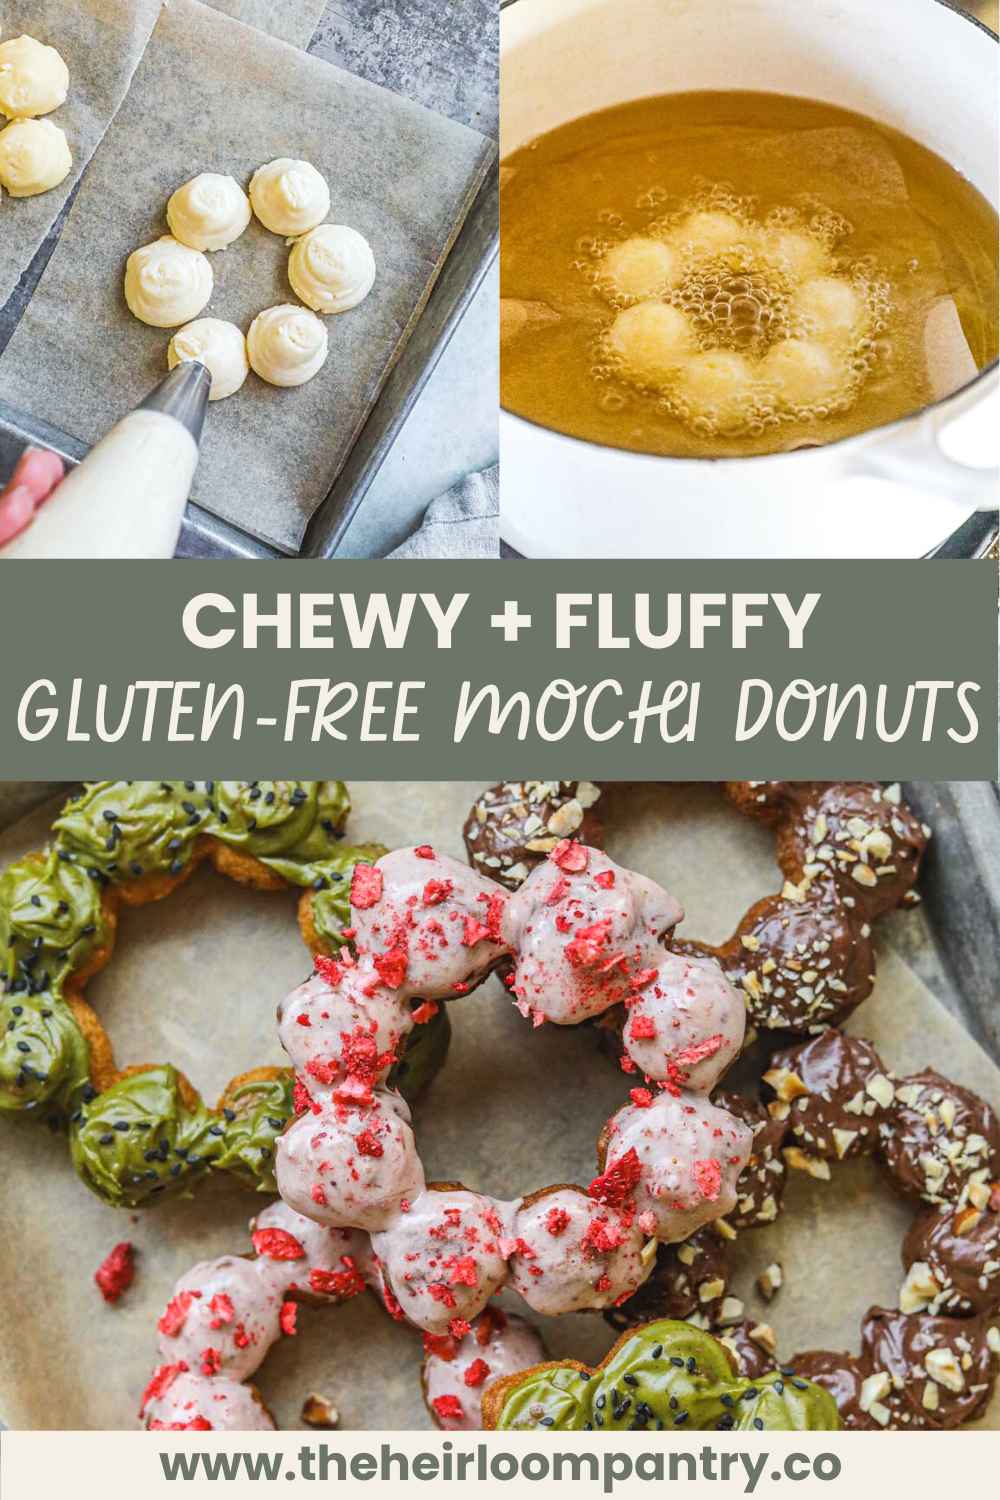 Chewy, fluffy mochi donuts Pinterest pin.